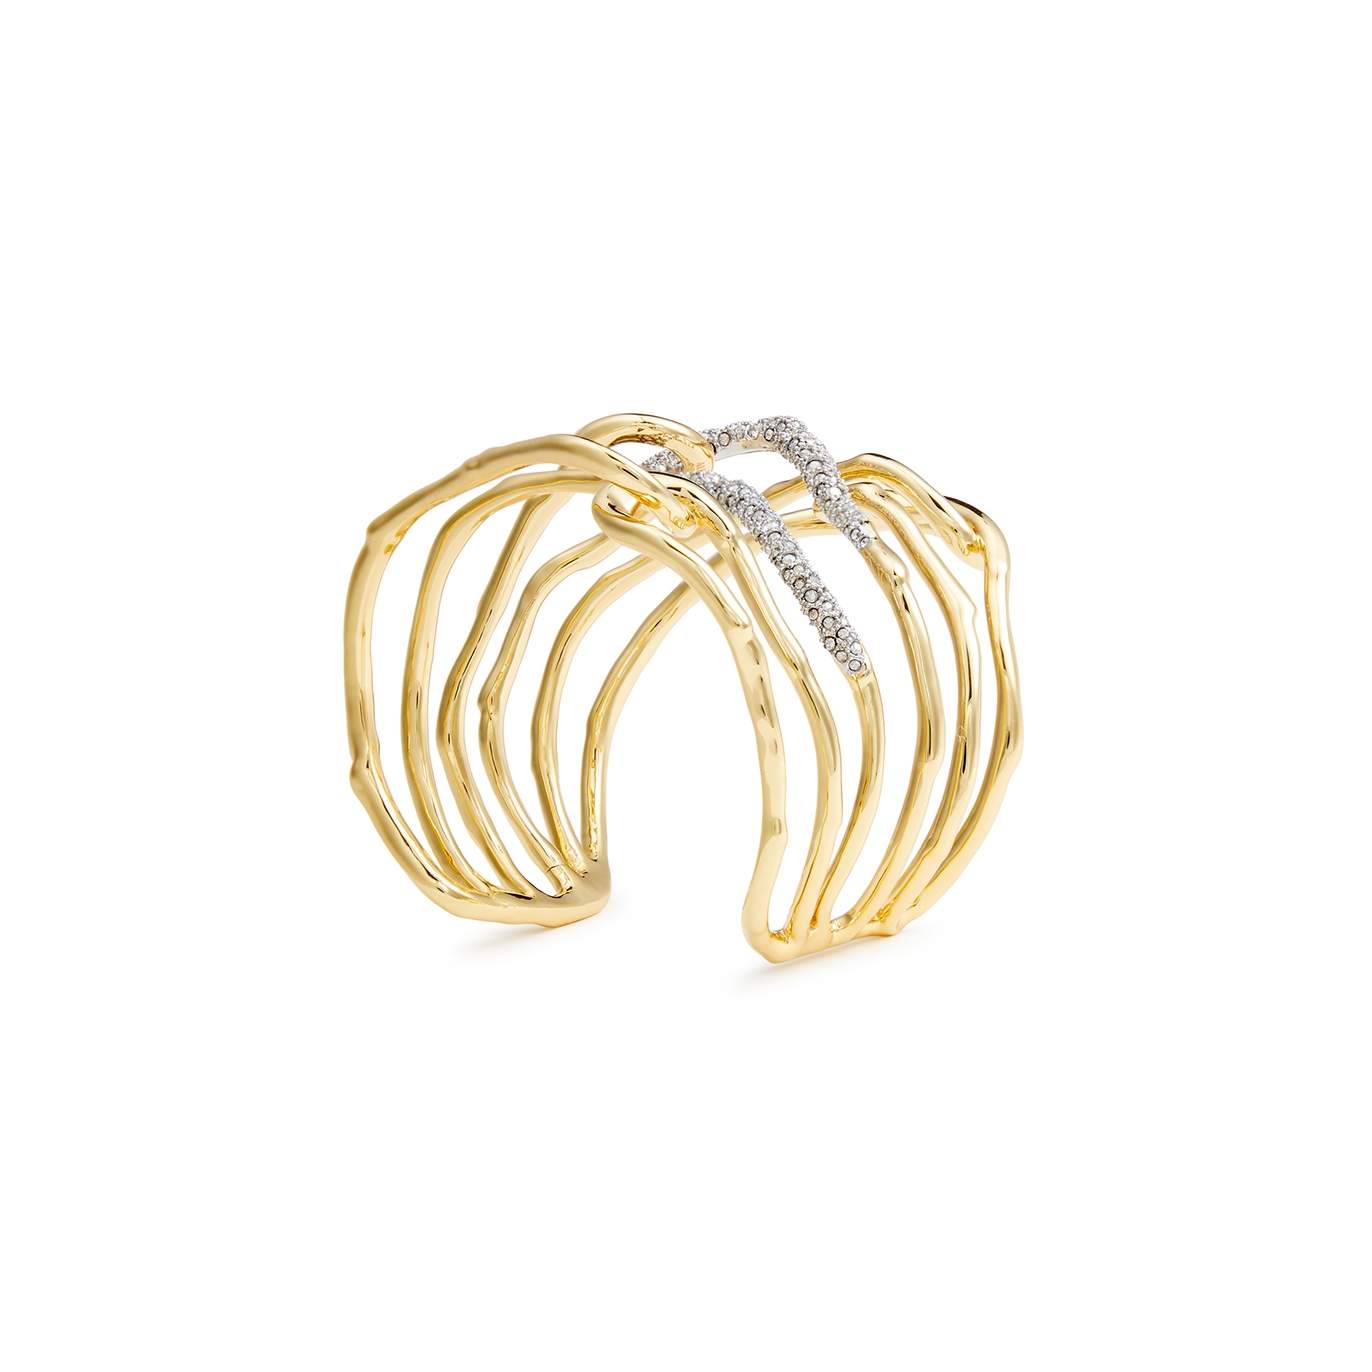 Alexis Bittar Solanales Embellished 14kt Gold-plated Cuff